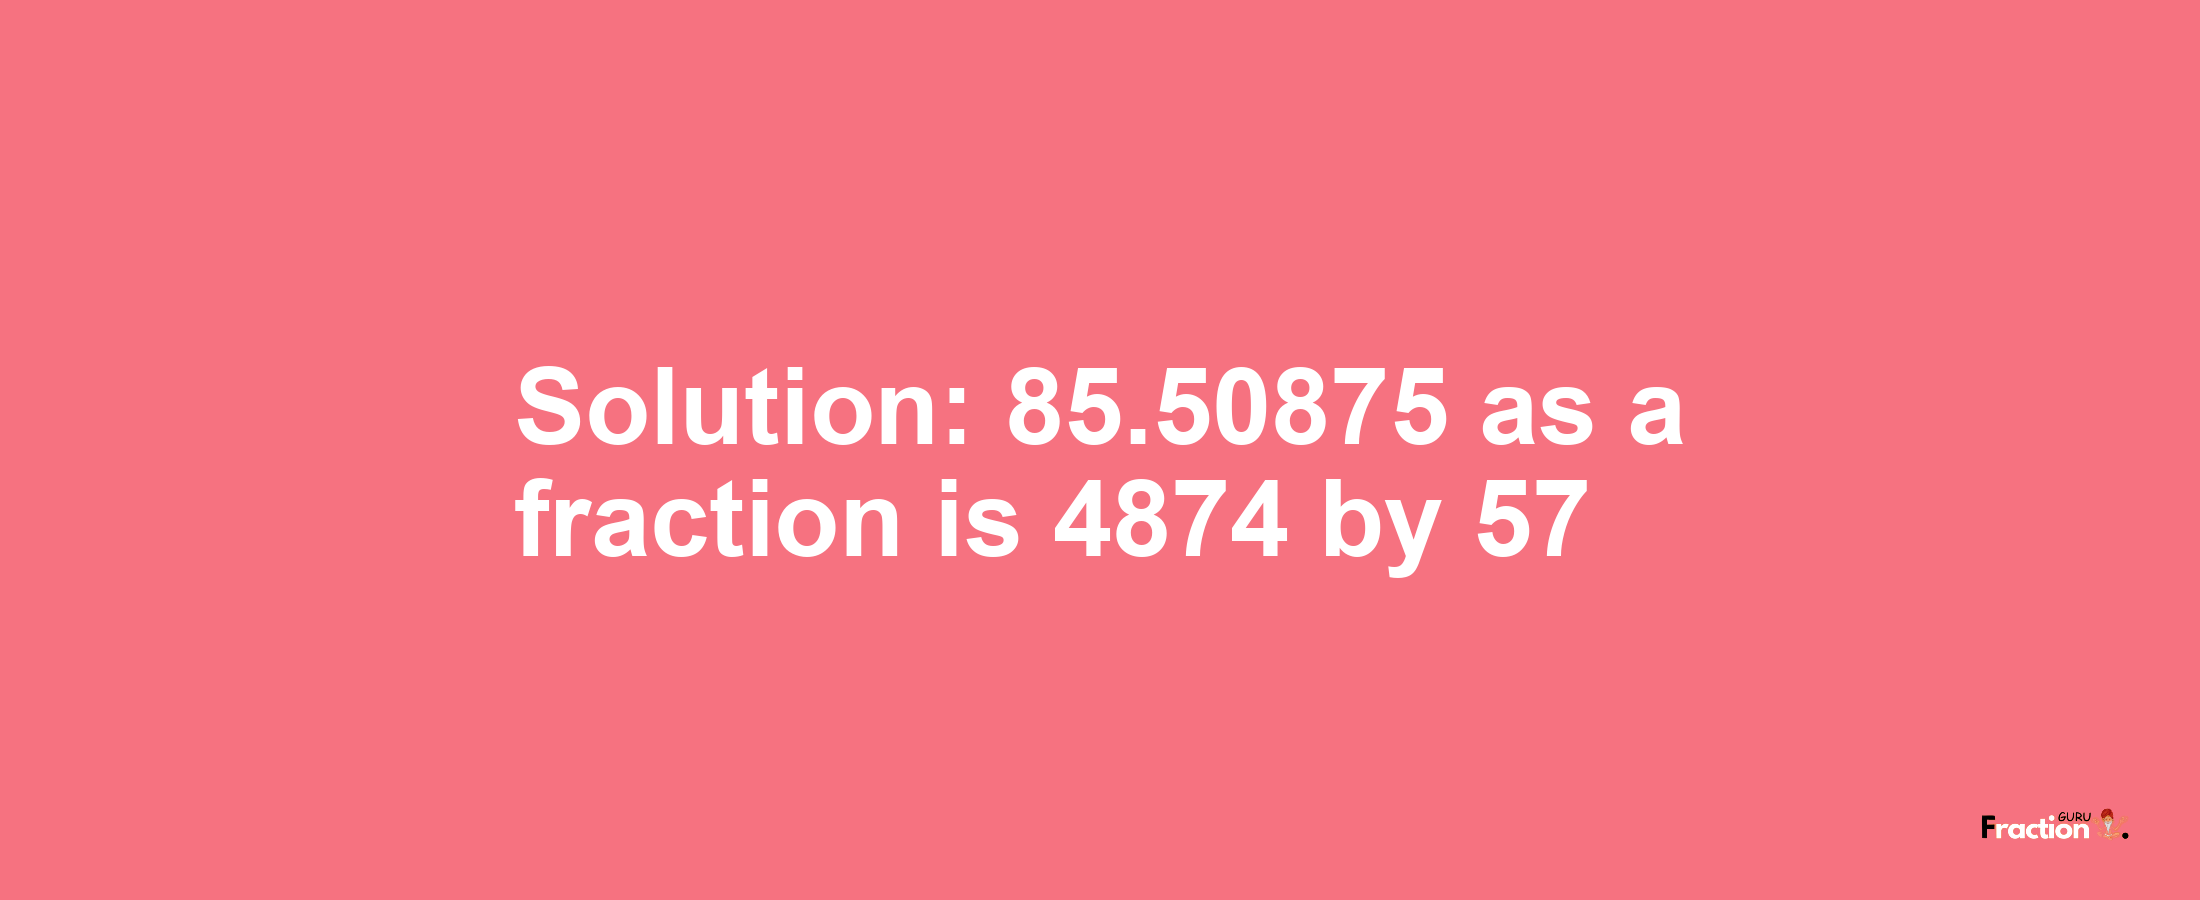 Solution:85.50875 as a fraction is 4874/57